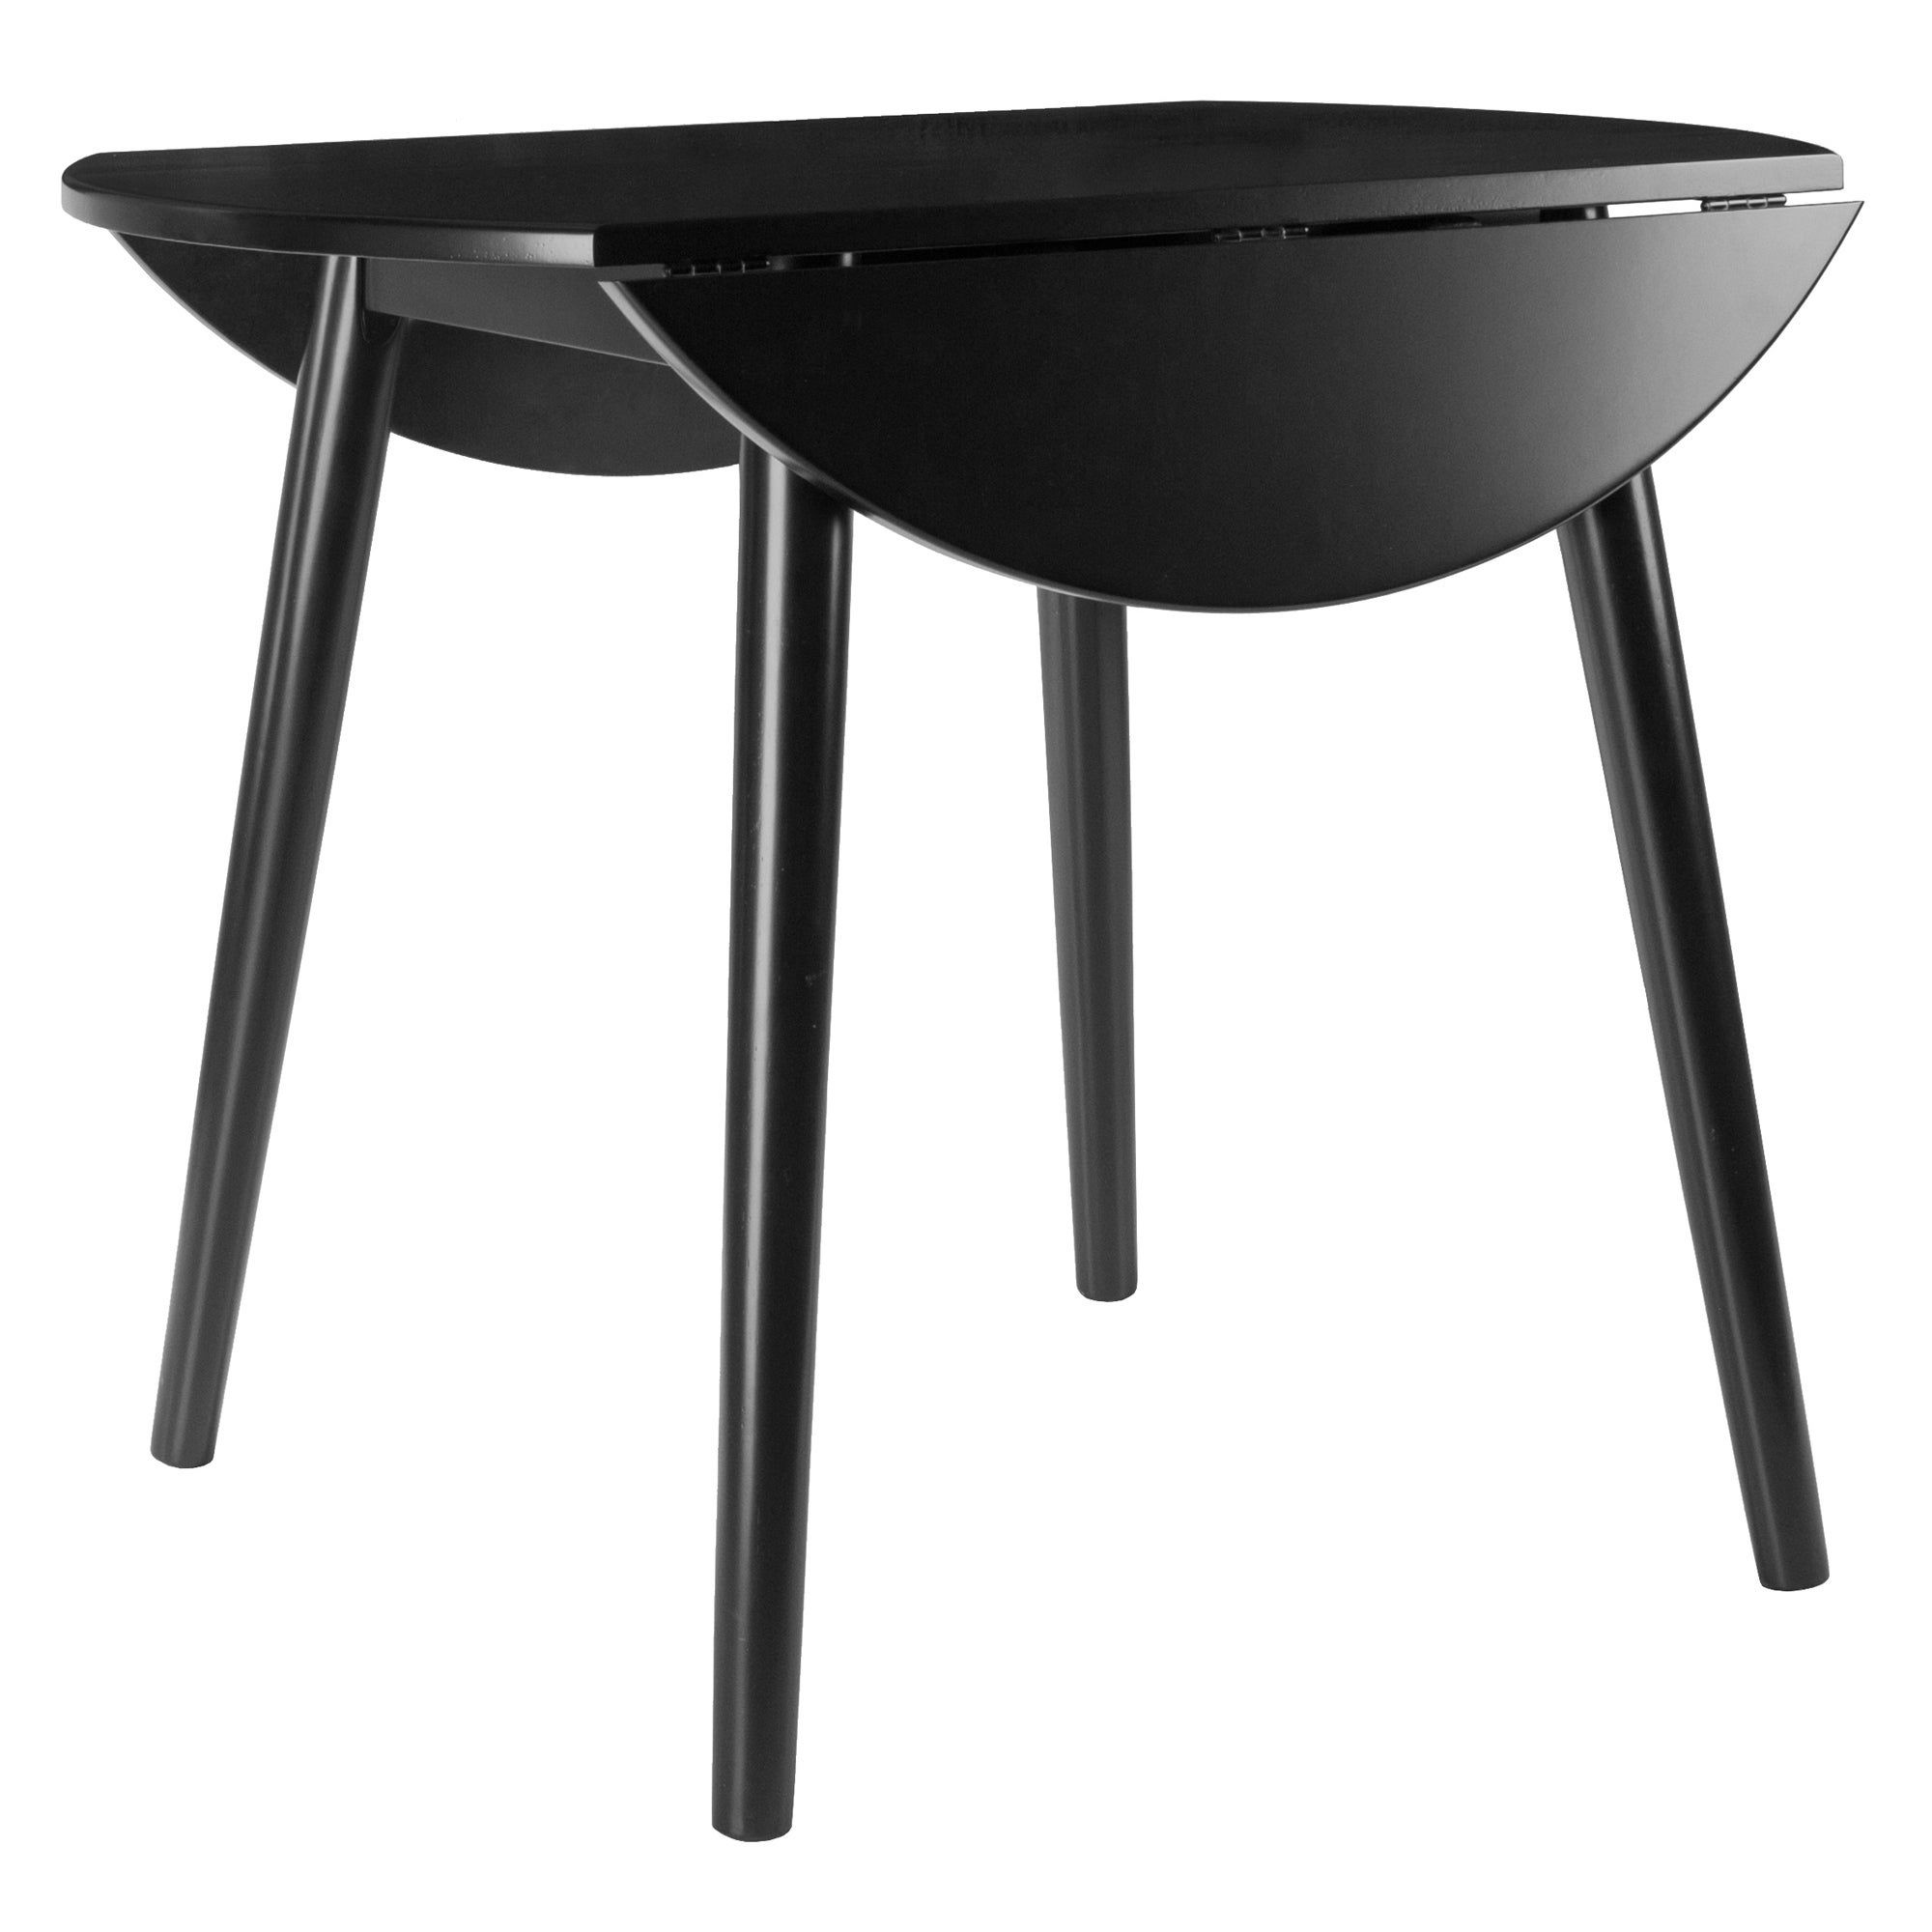 Black Shayne Drop Leaf Kitchen Tables Pertaining To Current Drop Leaf Table Black – Martinique (View 24 of 25)